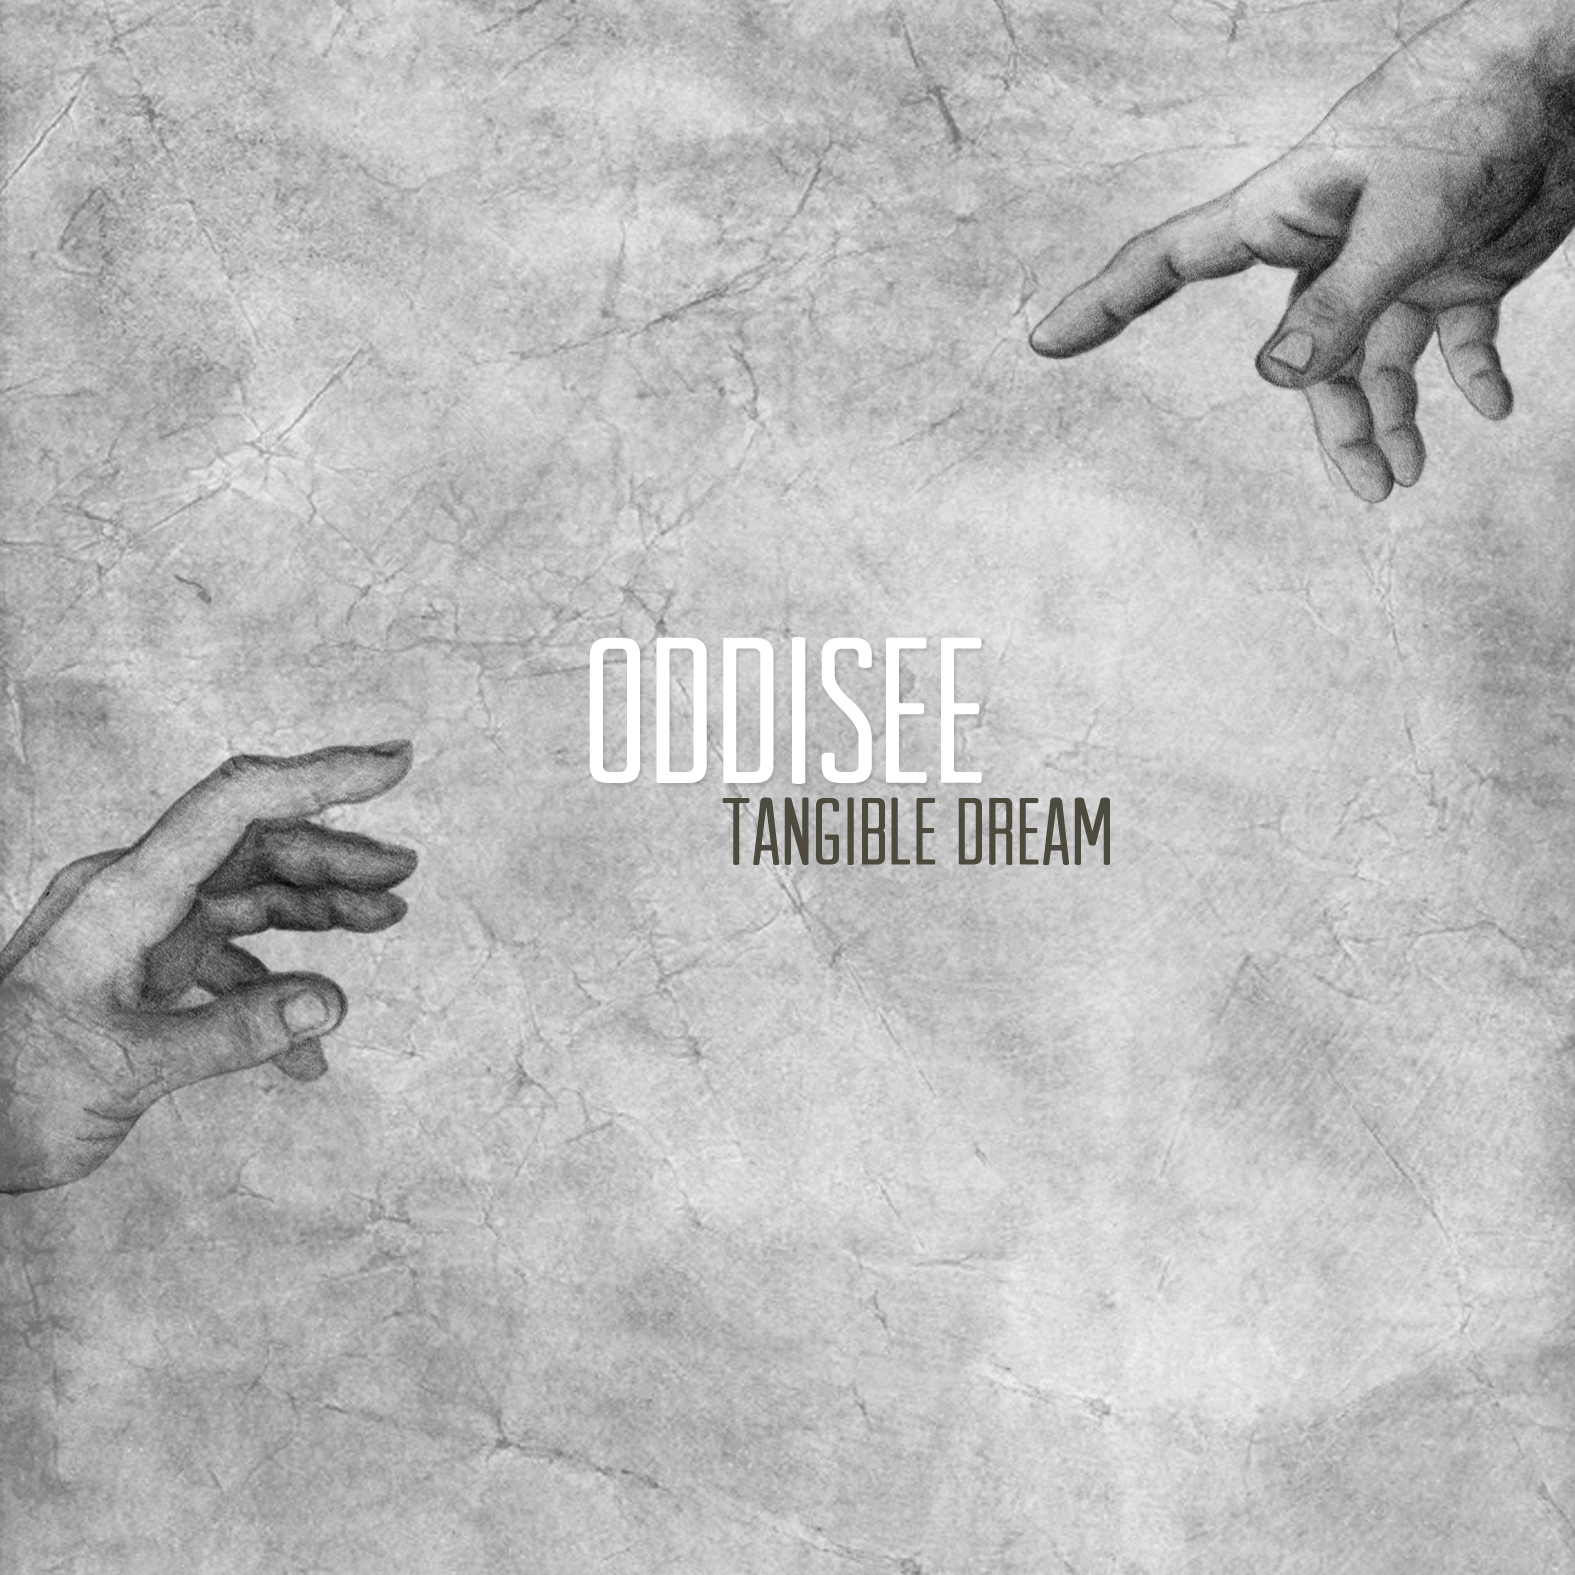 Oddisee The Tangible Dream Download Free